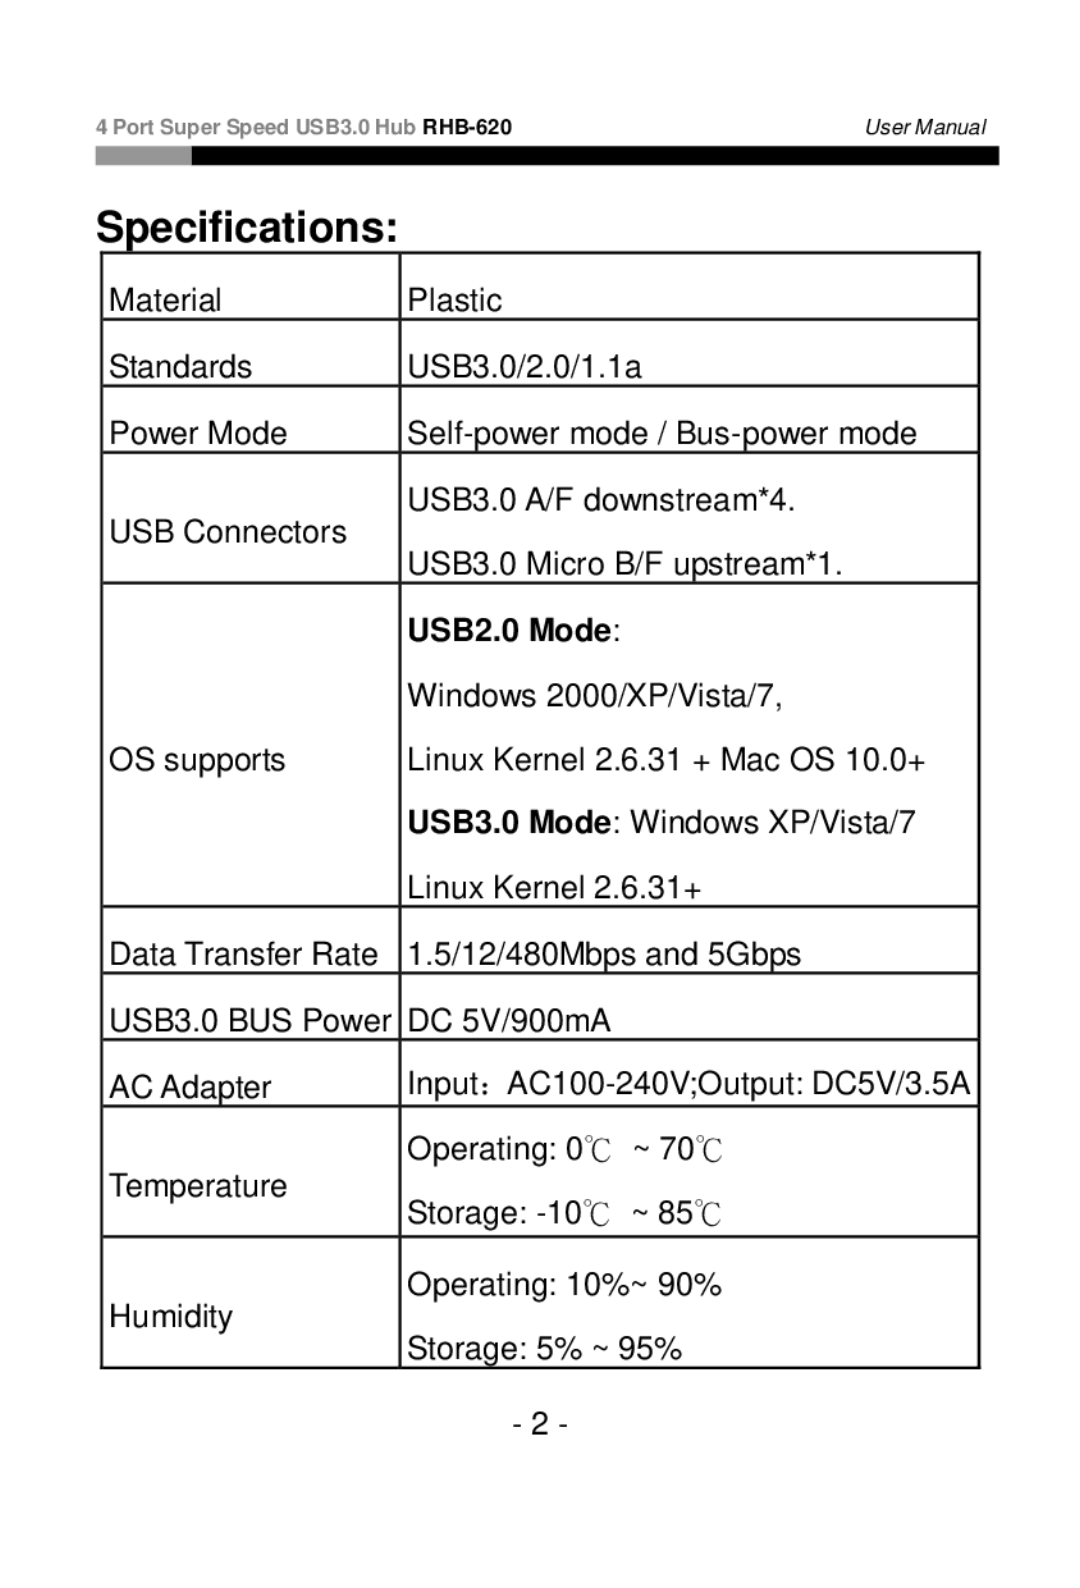 Rosewill RHB-620 user manual Specifications, USB2.0 Mode 